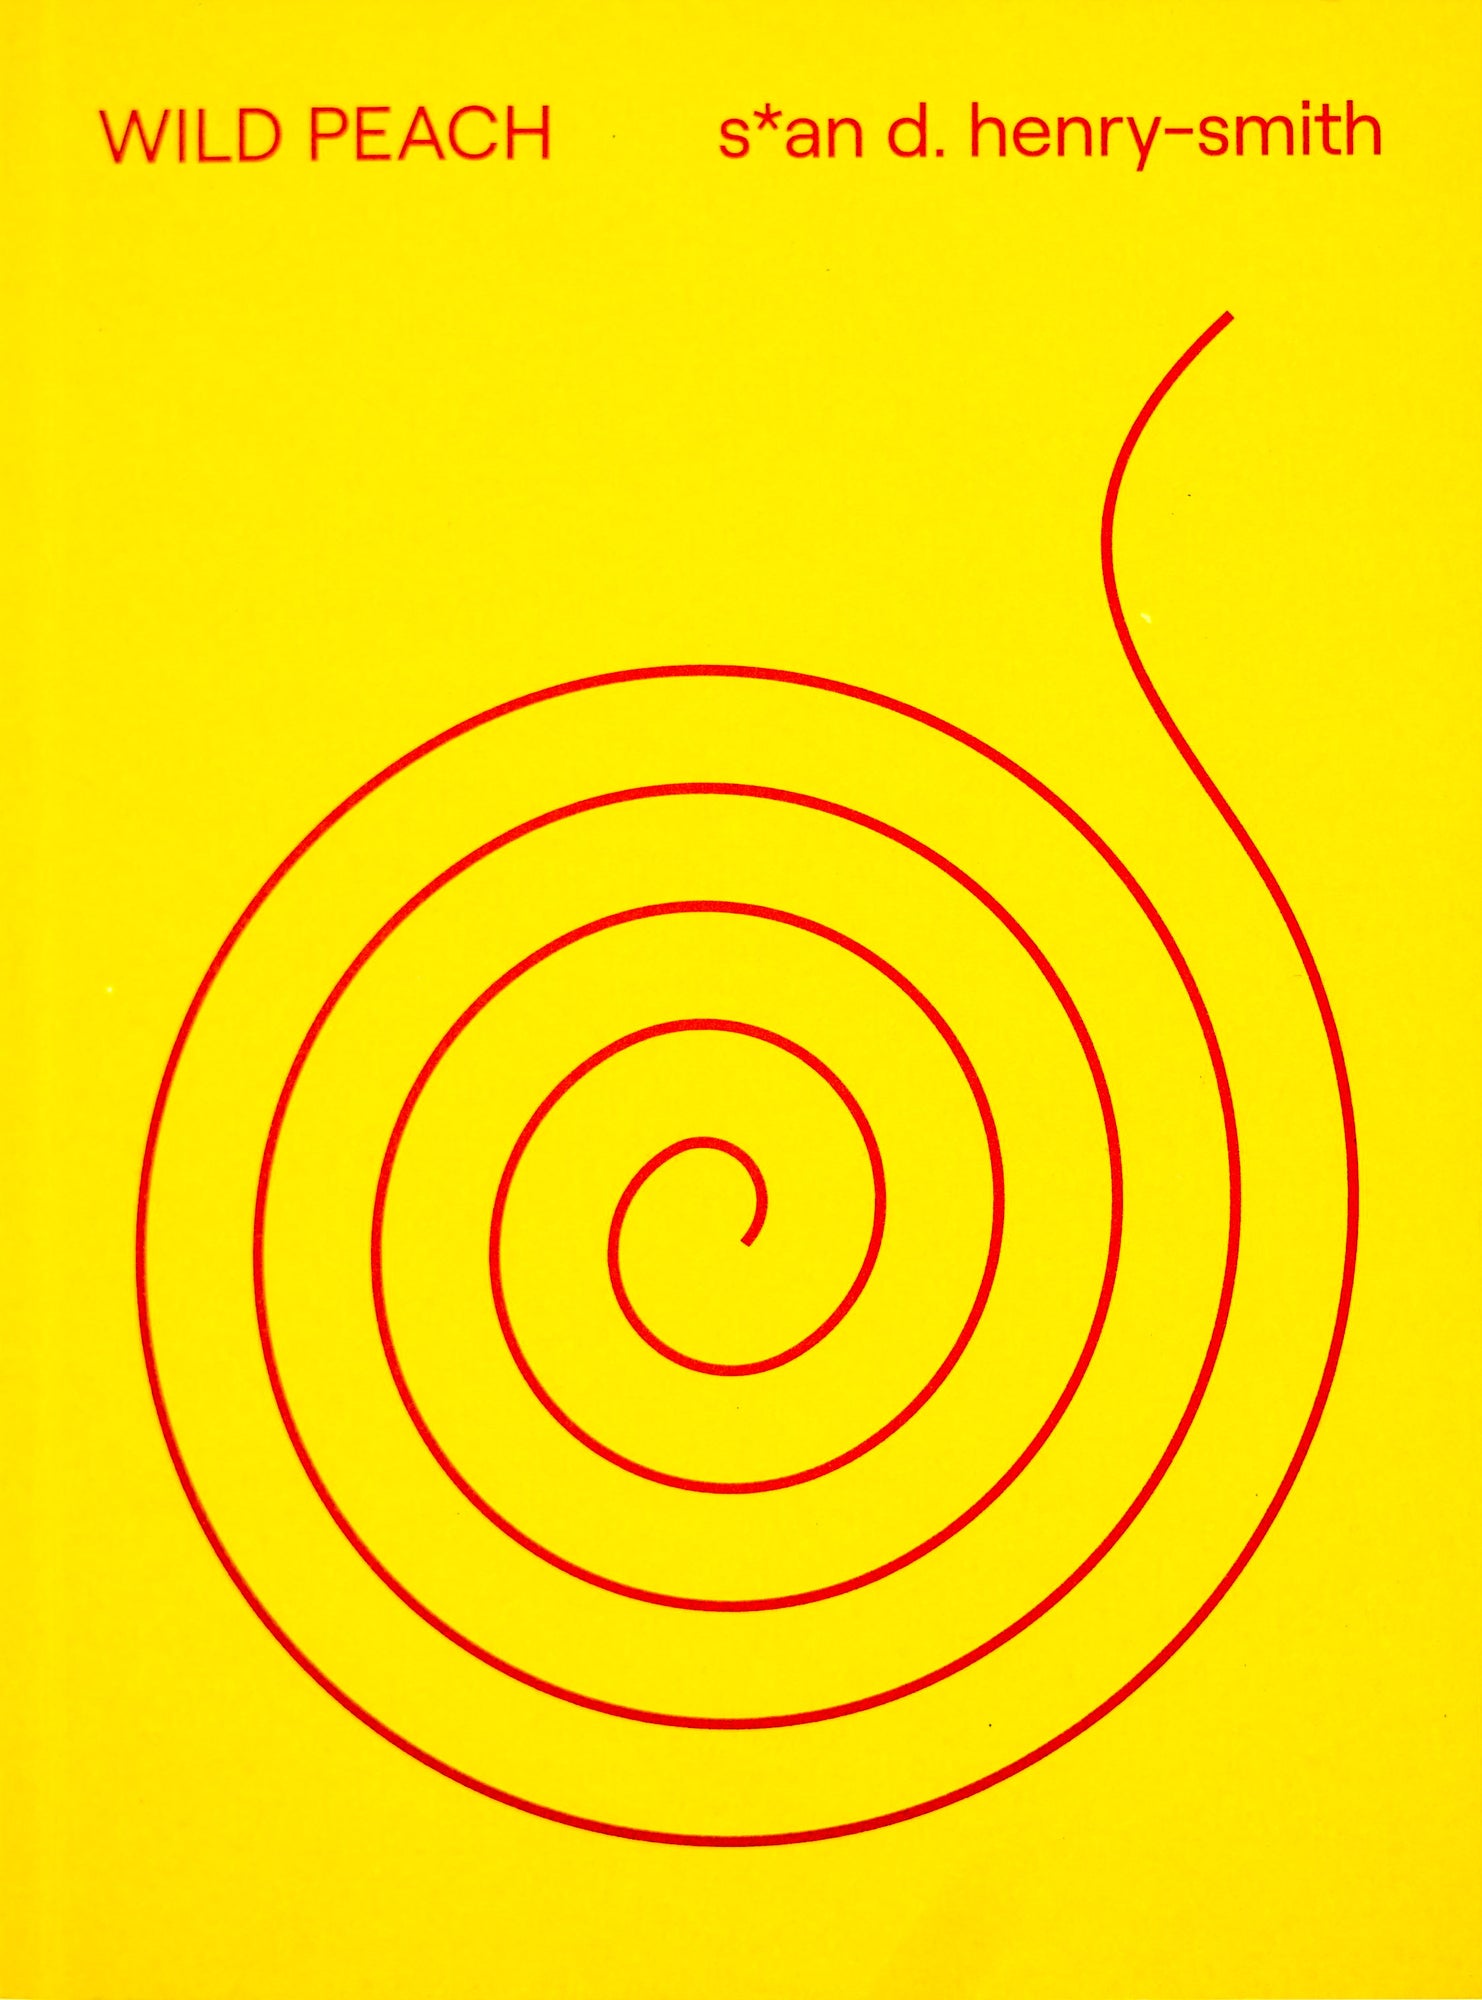 Book cover in bright yellow with a red spiral central on the page. Above in one row is the title WILD PEACH in red sans serif and next to it the author s*an d. henry-smith as well in red sans serif.